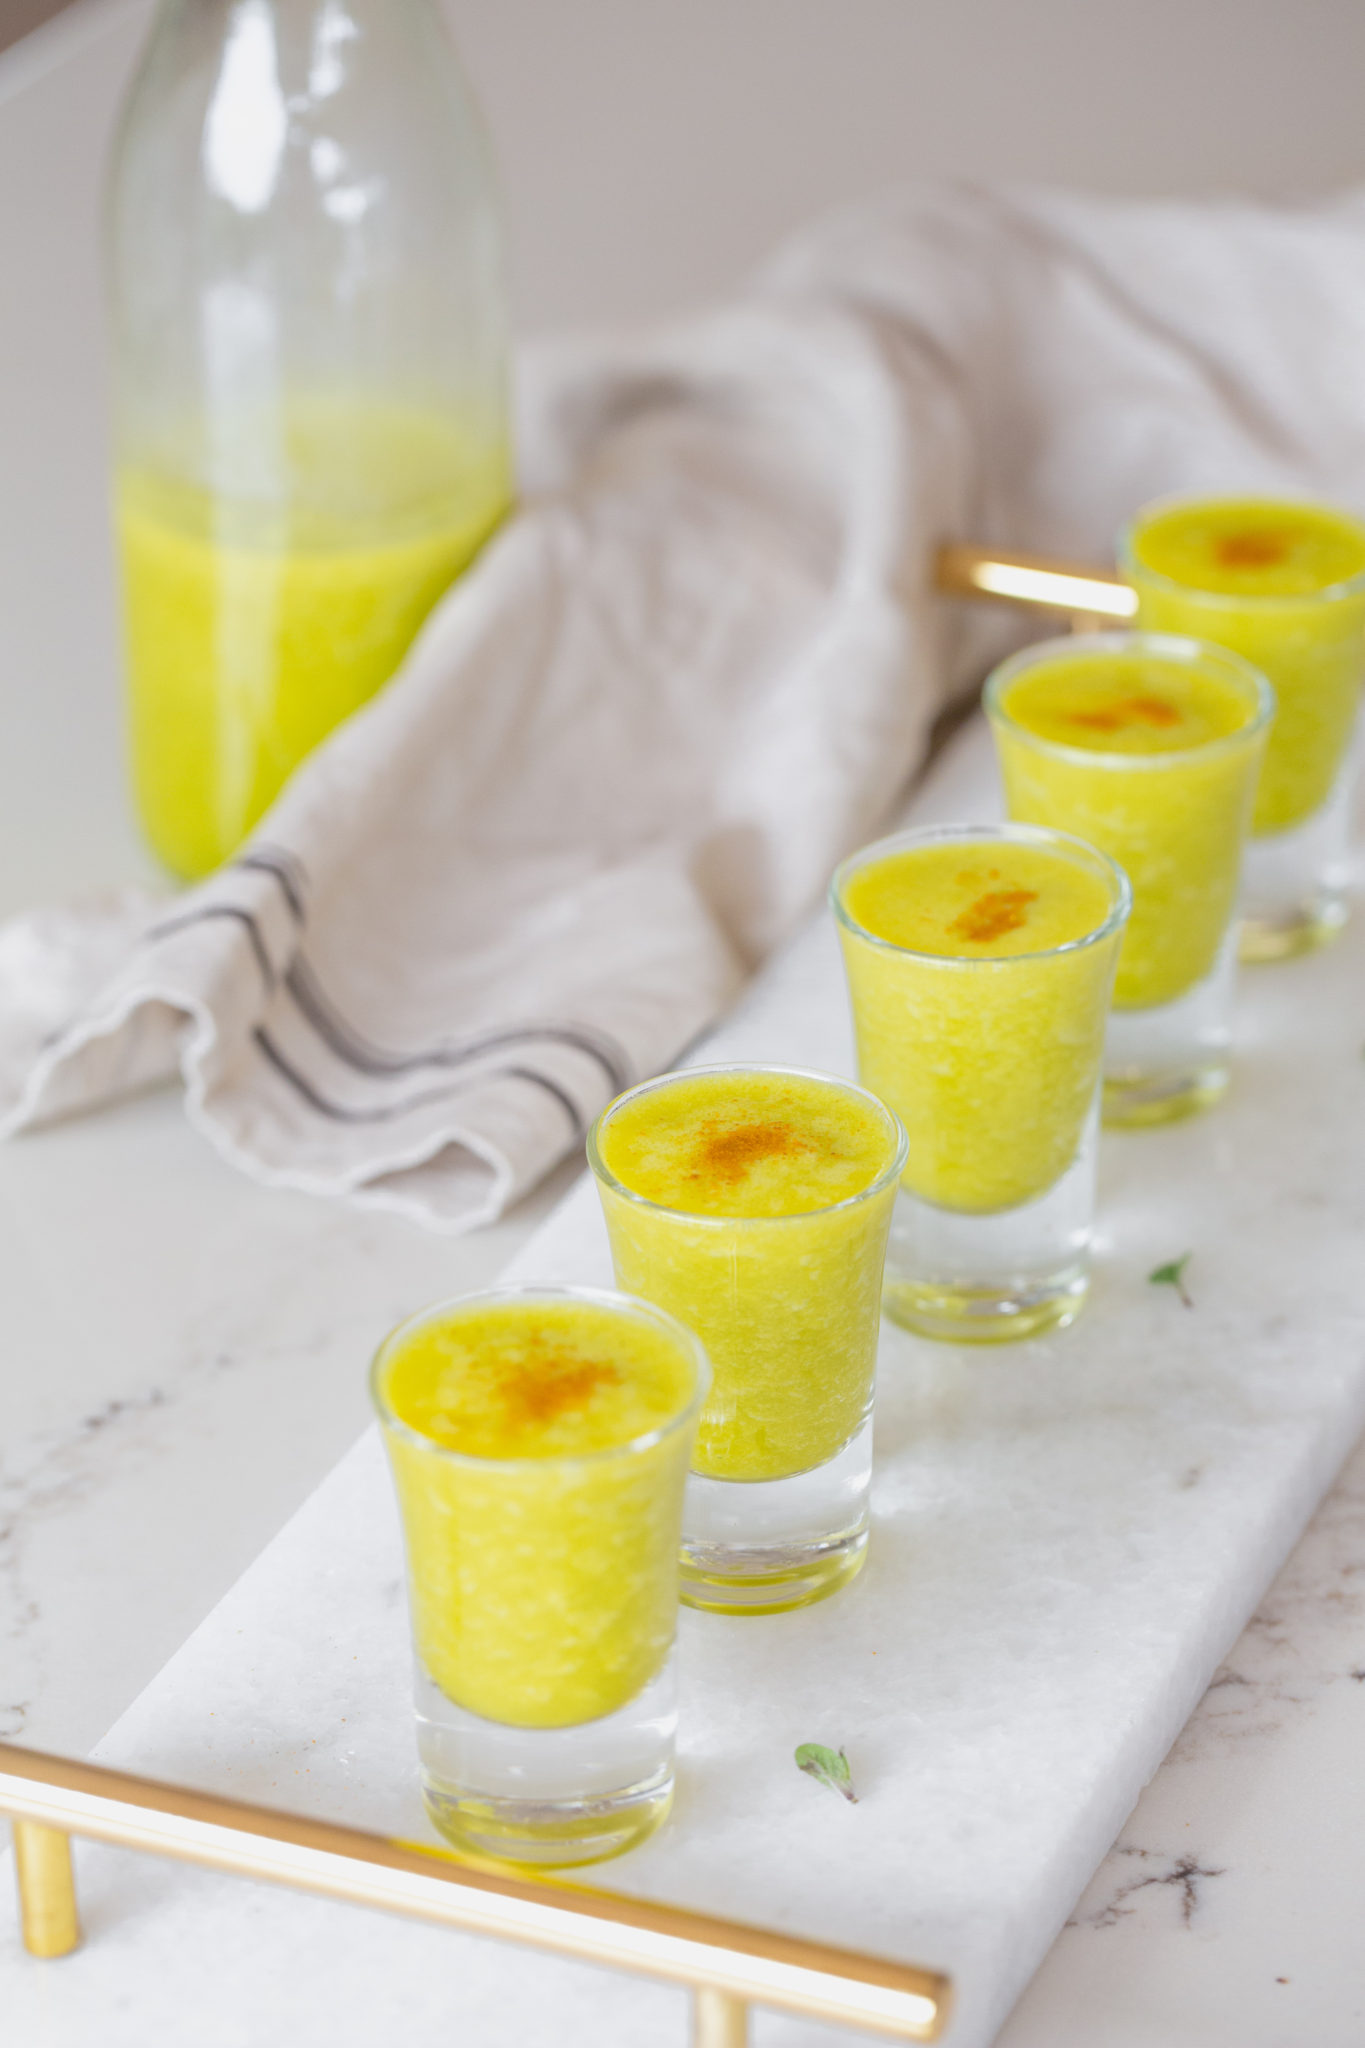 Line up of Flu Shot Juice with turmeric sprinkled on a white platter with cream tea towel